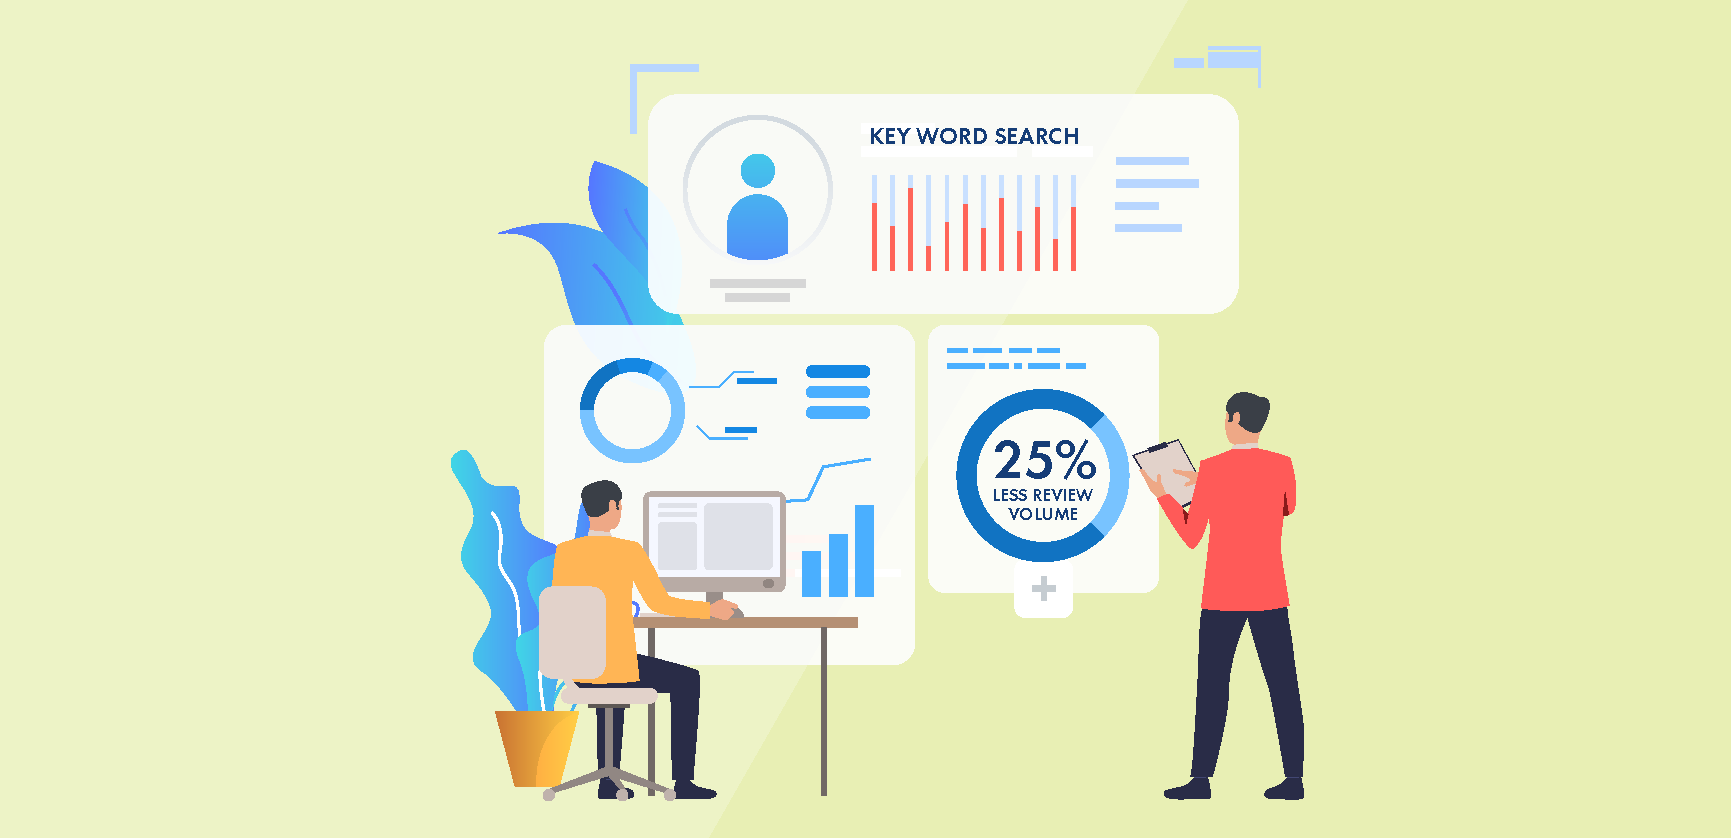 Collection and keyword search strategies save 25% review volume